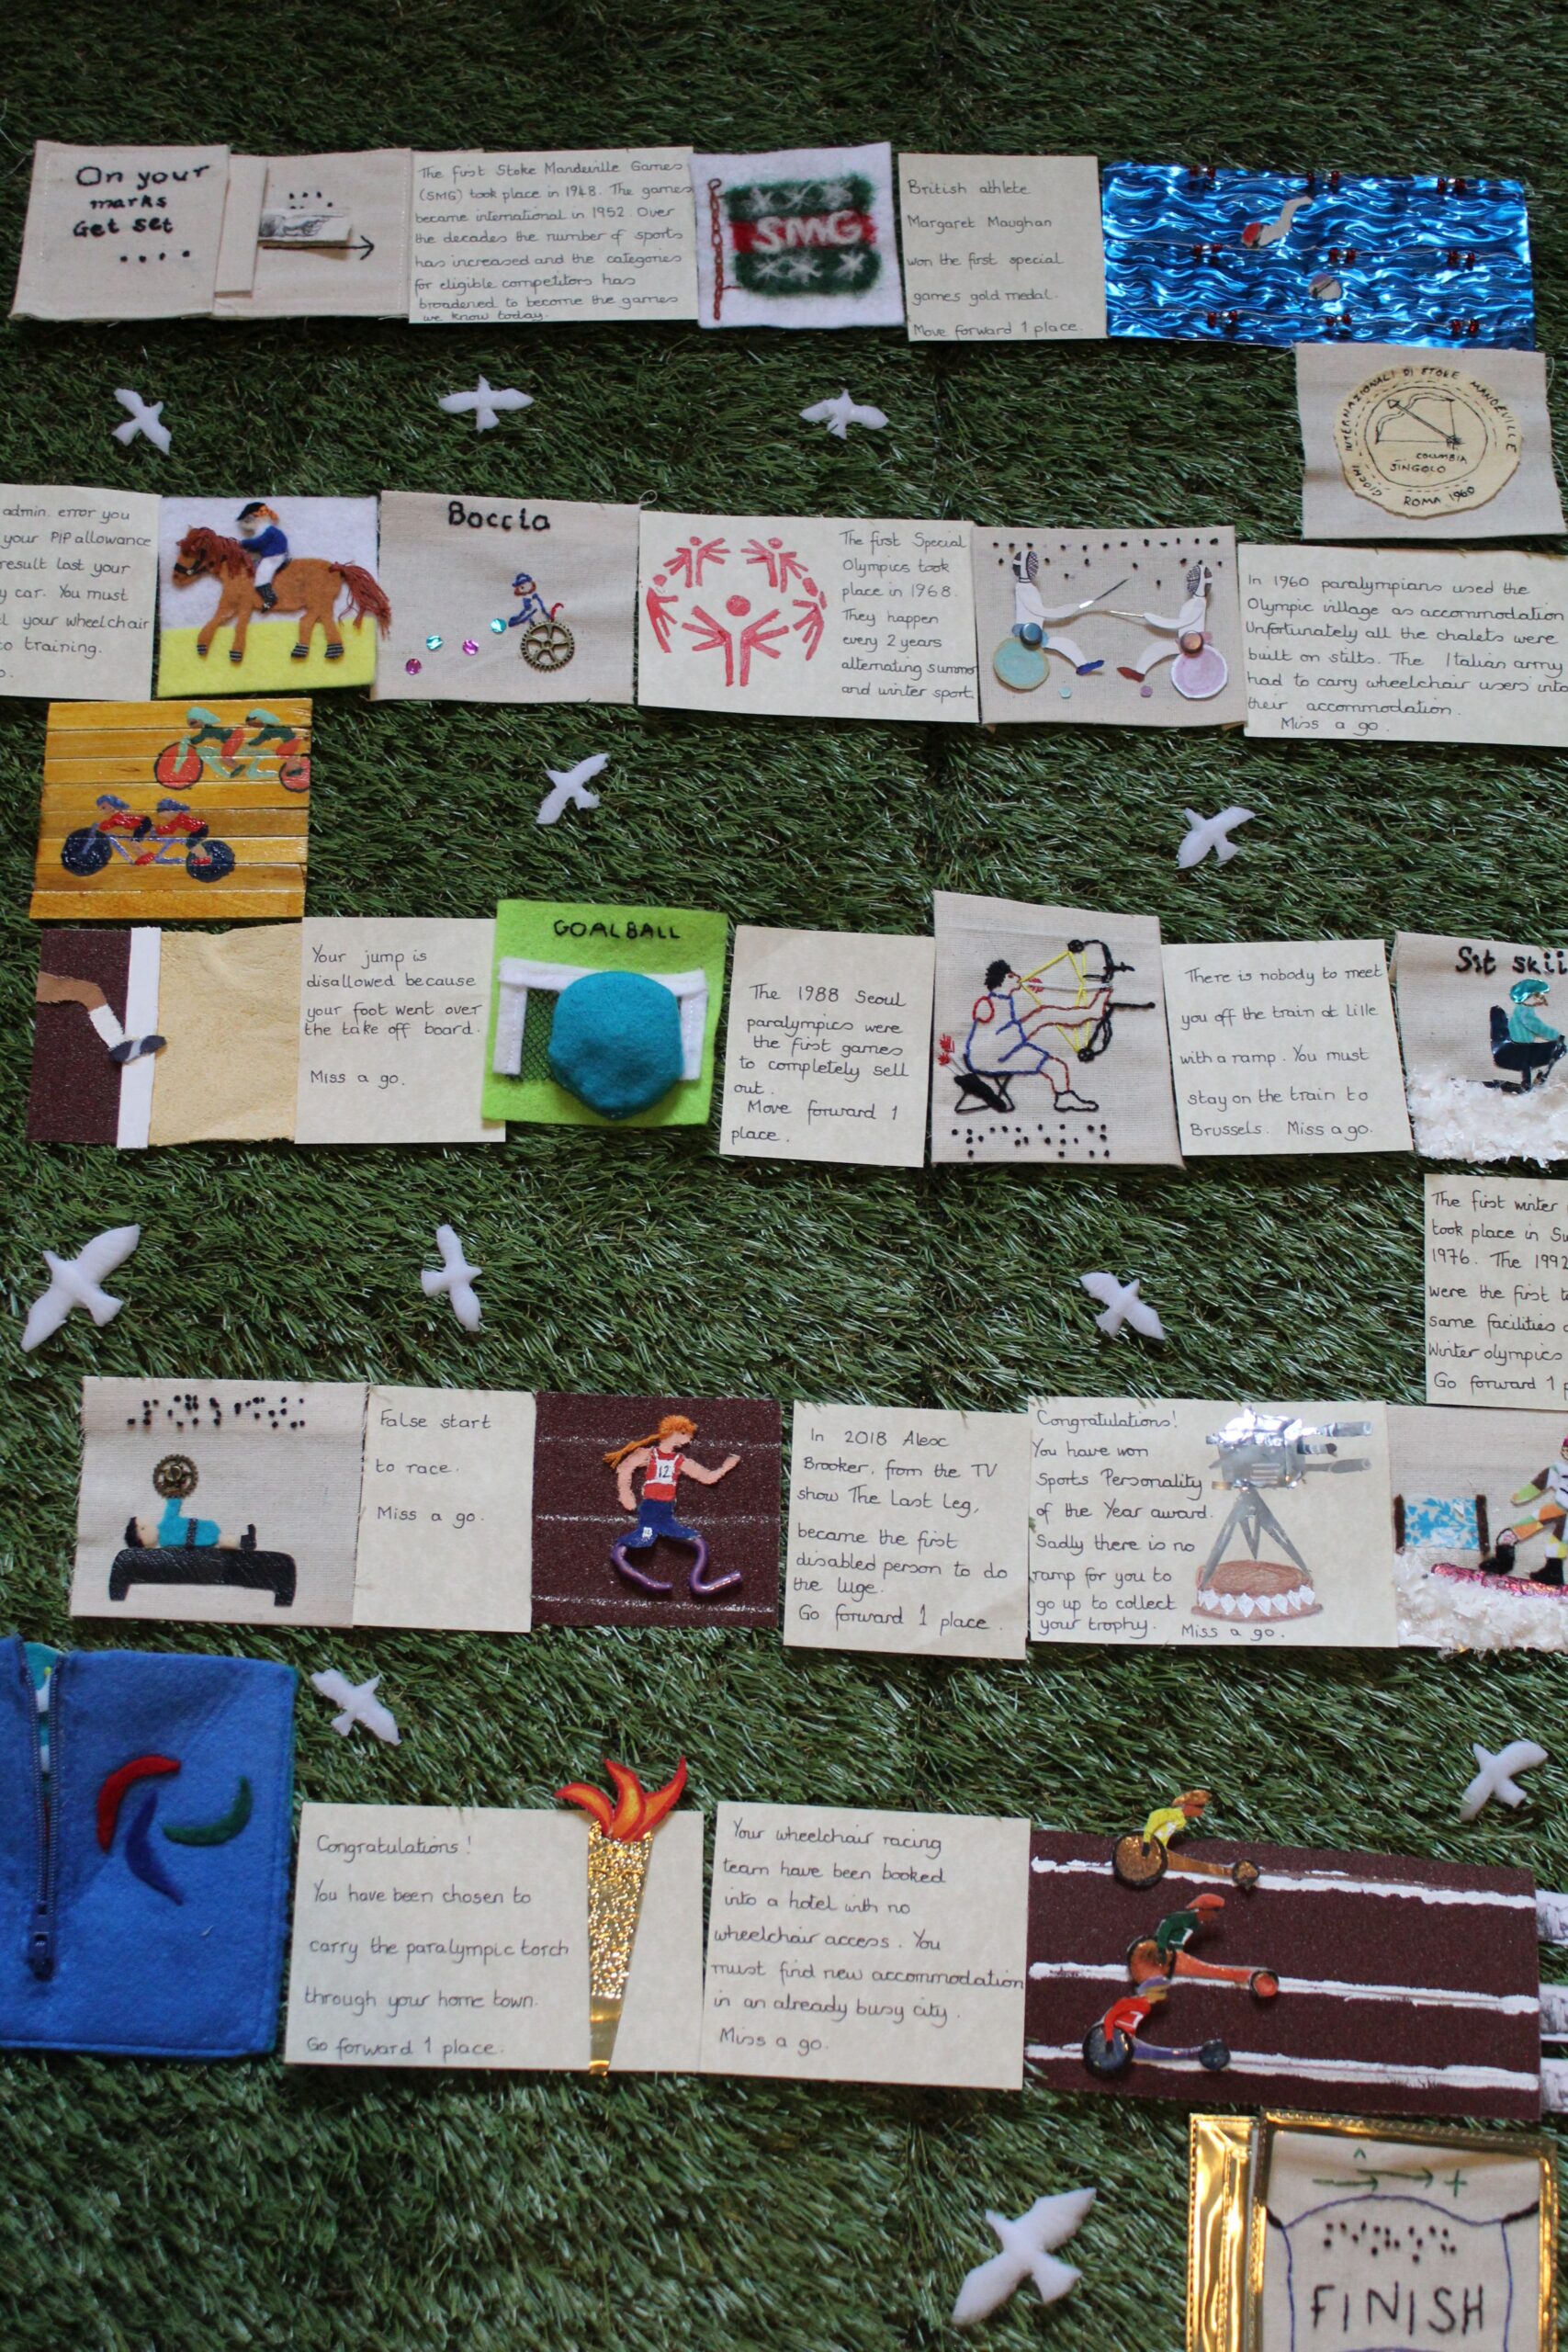 Full layout of an interactive game made from embroidered and embellished squares